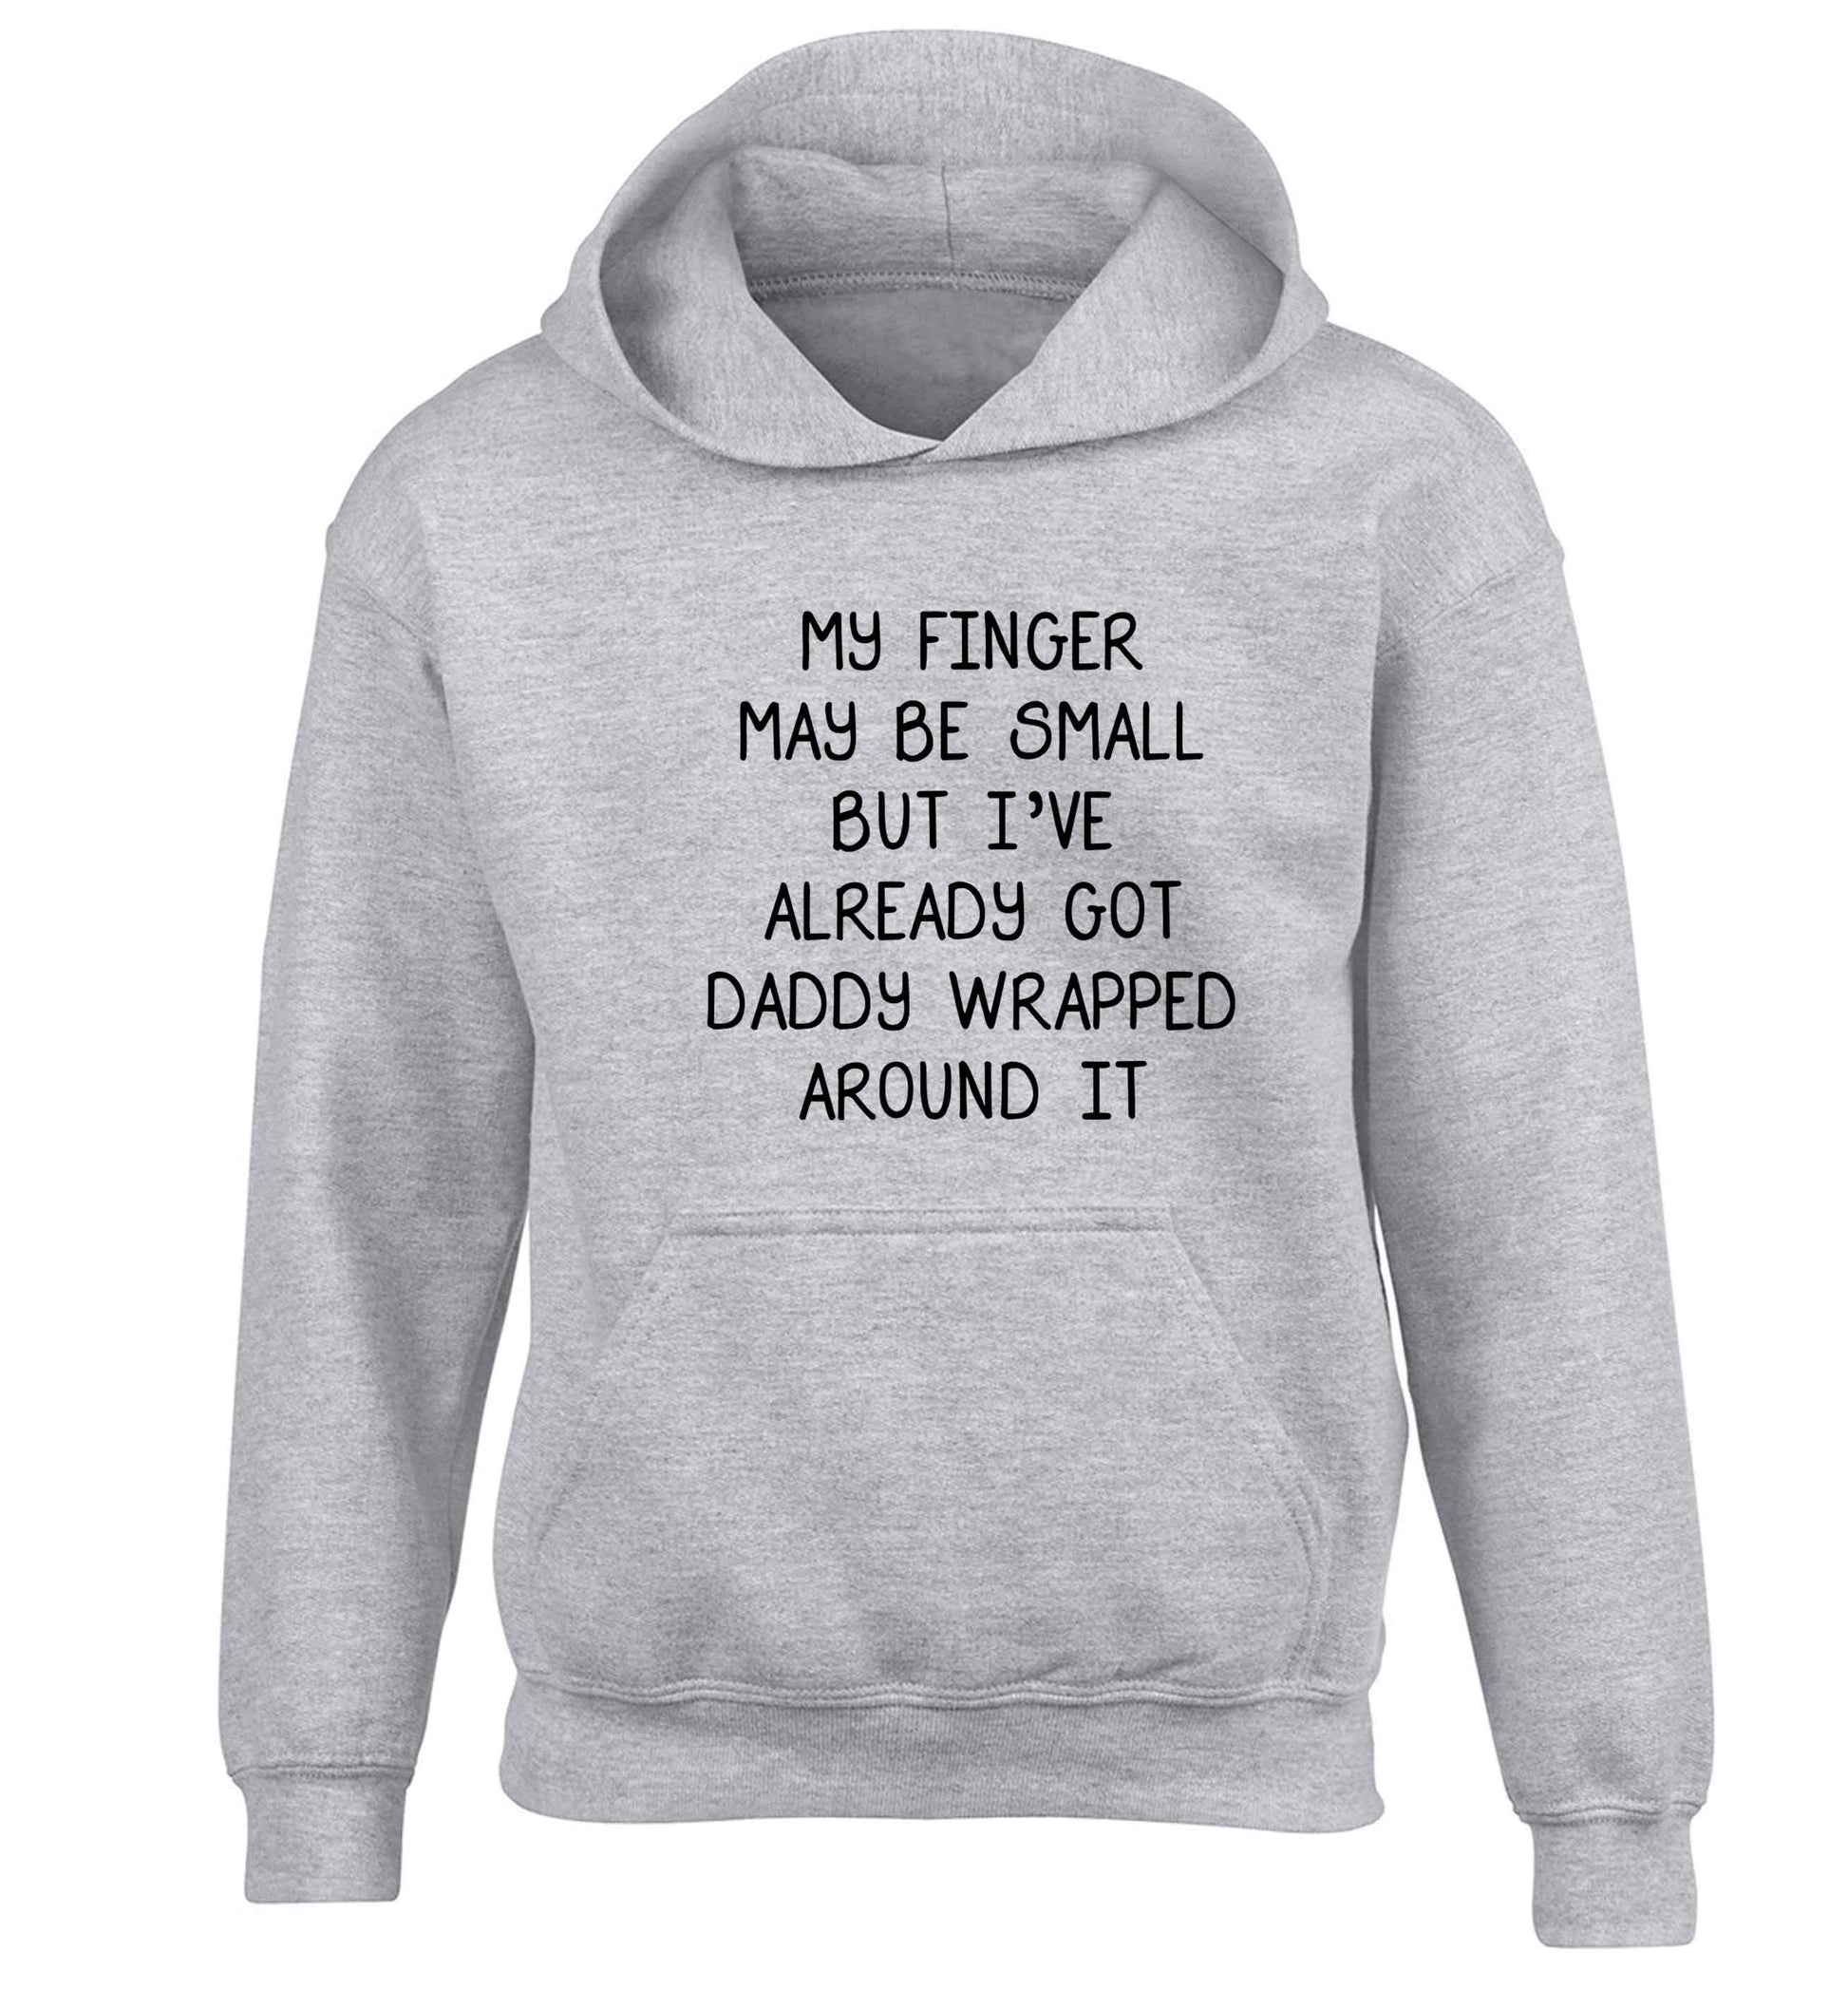 My finger may be small but I've already got daddy wrapped around it children's grey hoodie 12-13 Years